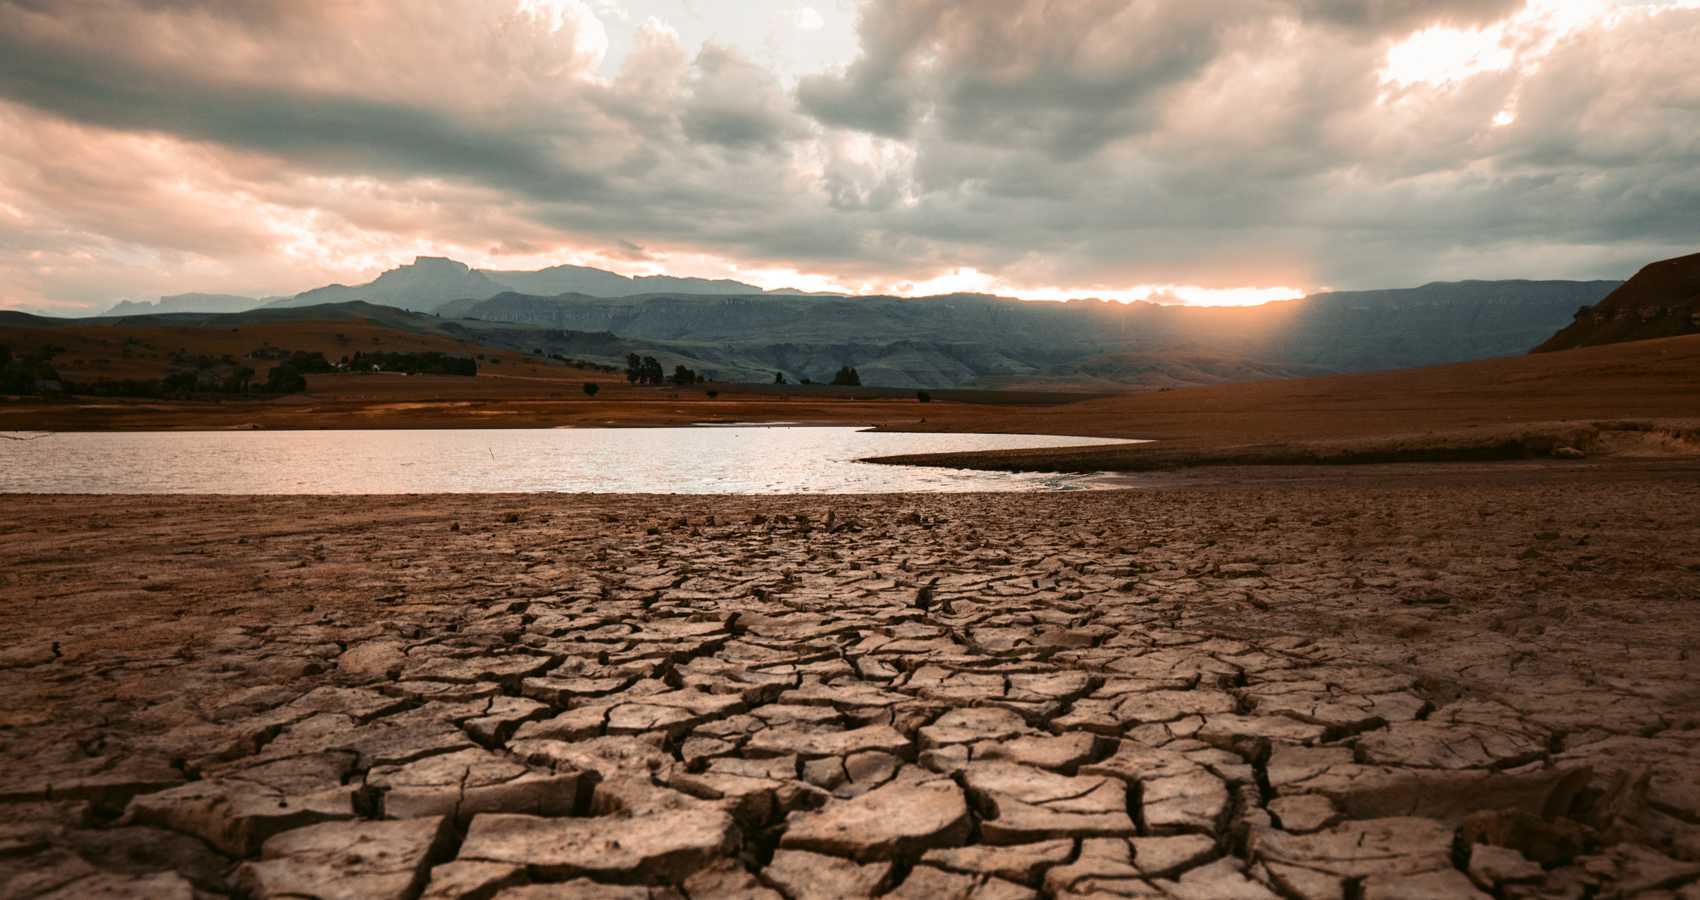 Years of Drought, flash fiction by Jo Curtain at Spillwords.com